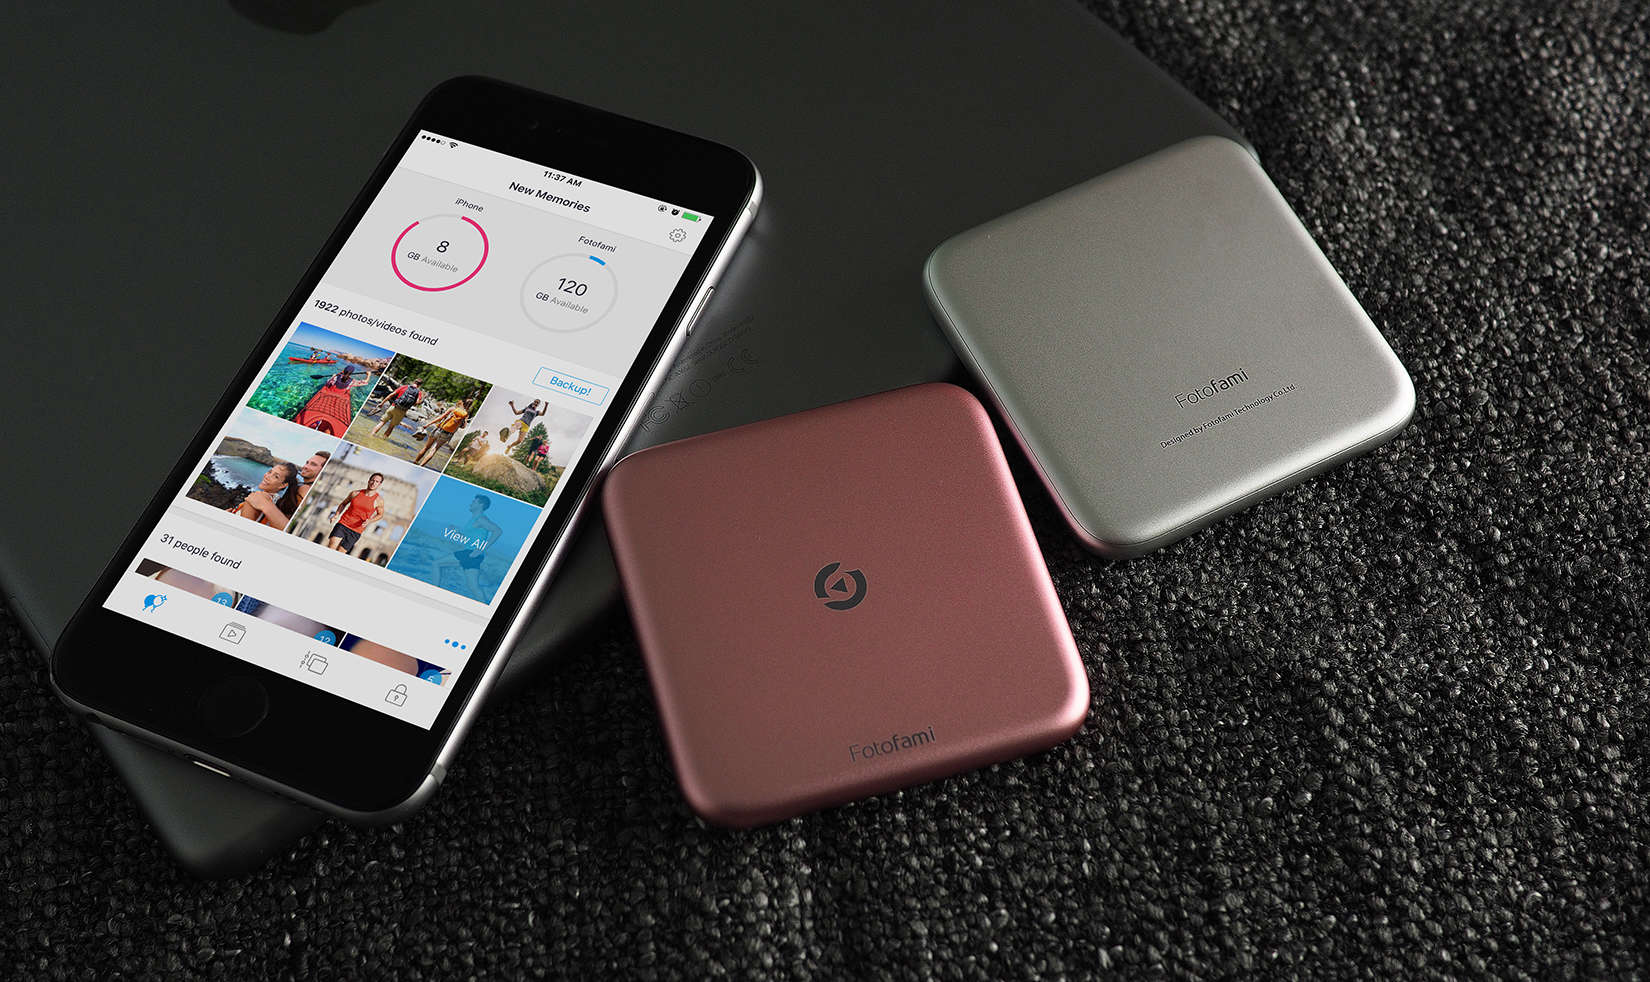 No Wi-Fi, no cloud with this iPhone photo and video storage solution.